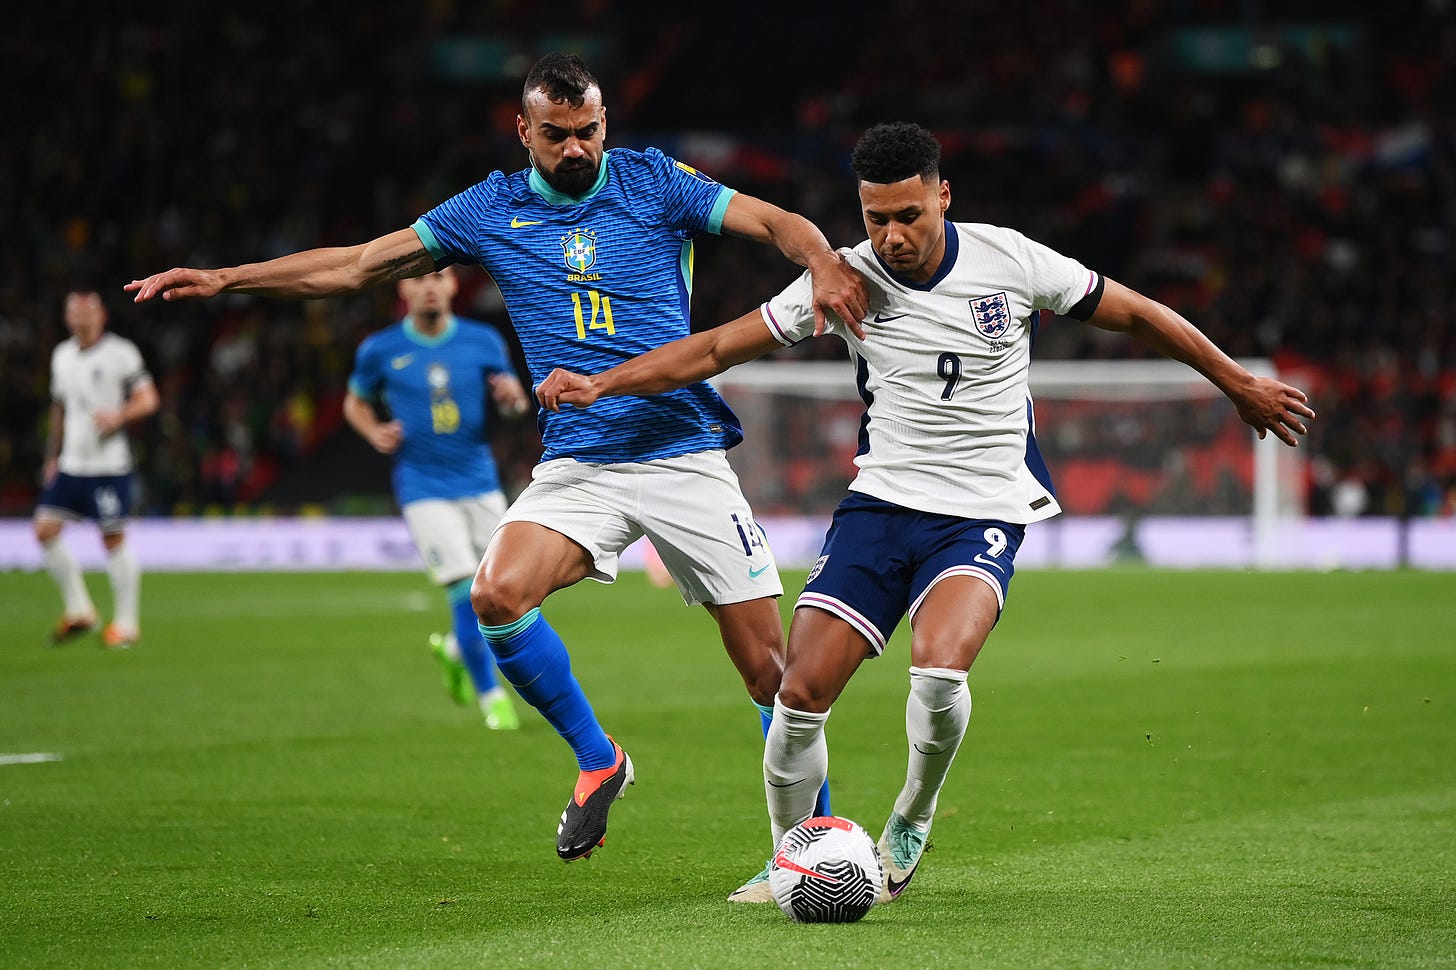 Brazil defender Fabricio Bruno pictured (left) challenging England's Ollie Watkins for the ball during an international friendly at Wembley in March 2024